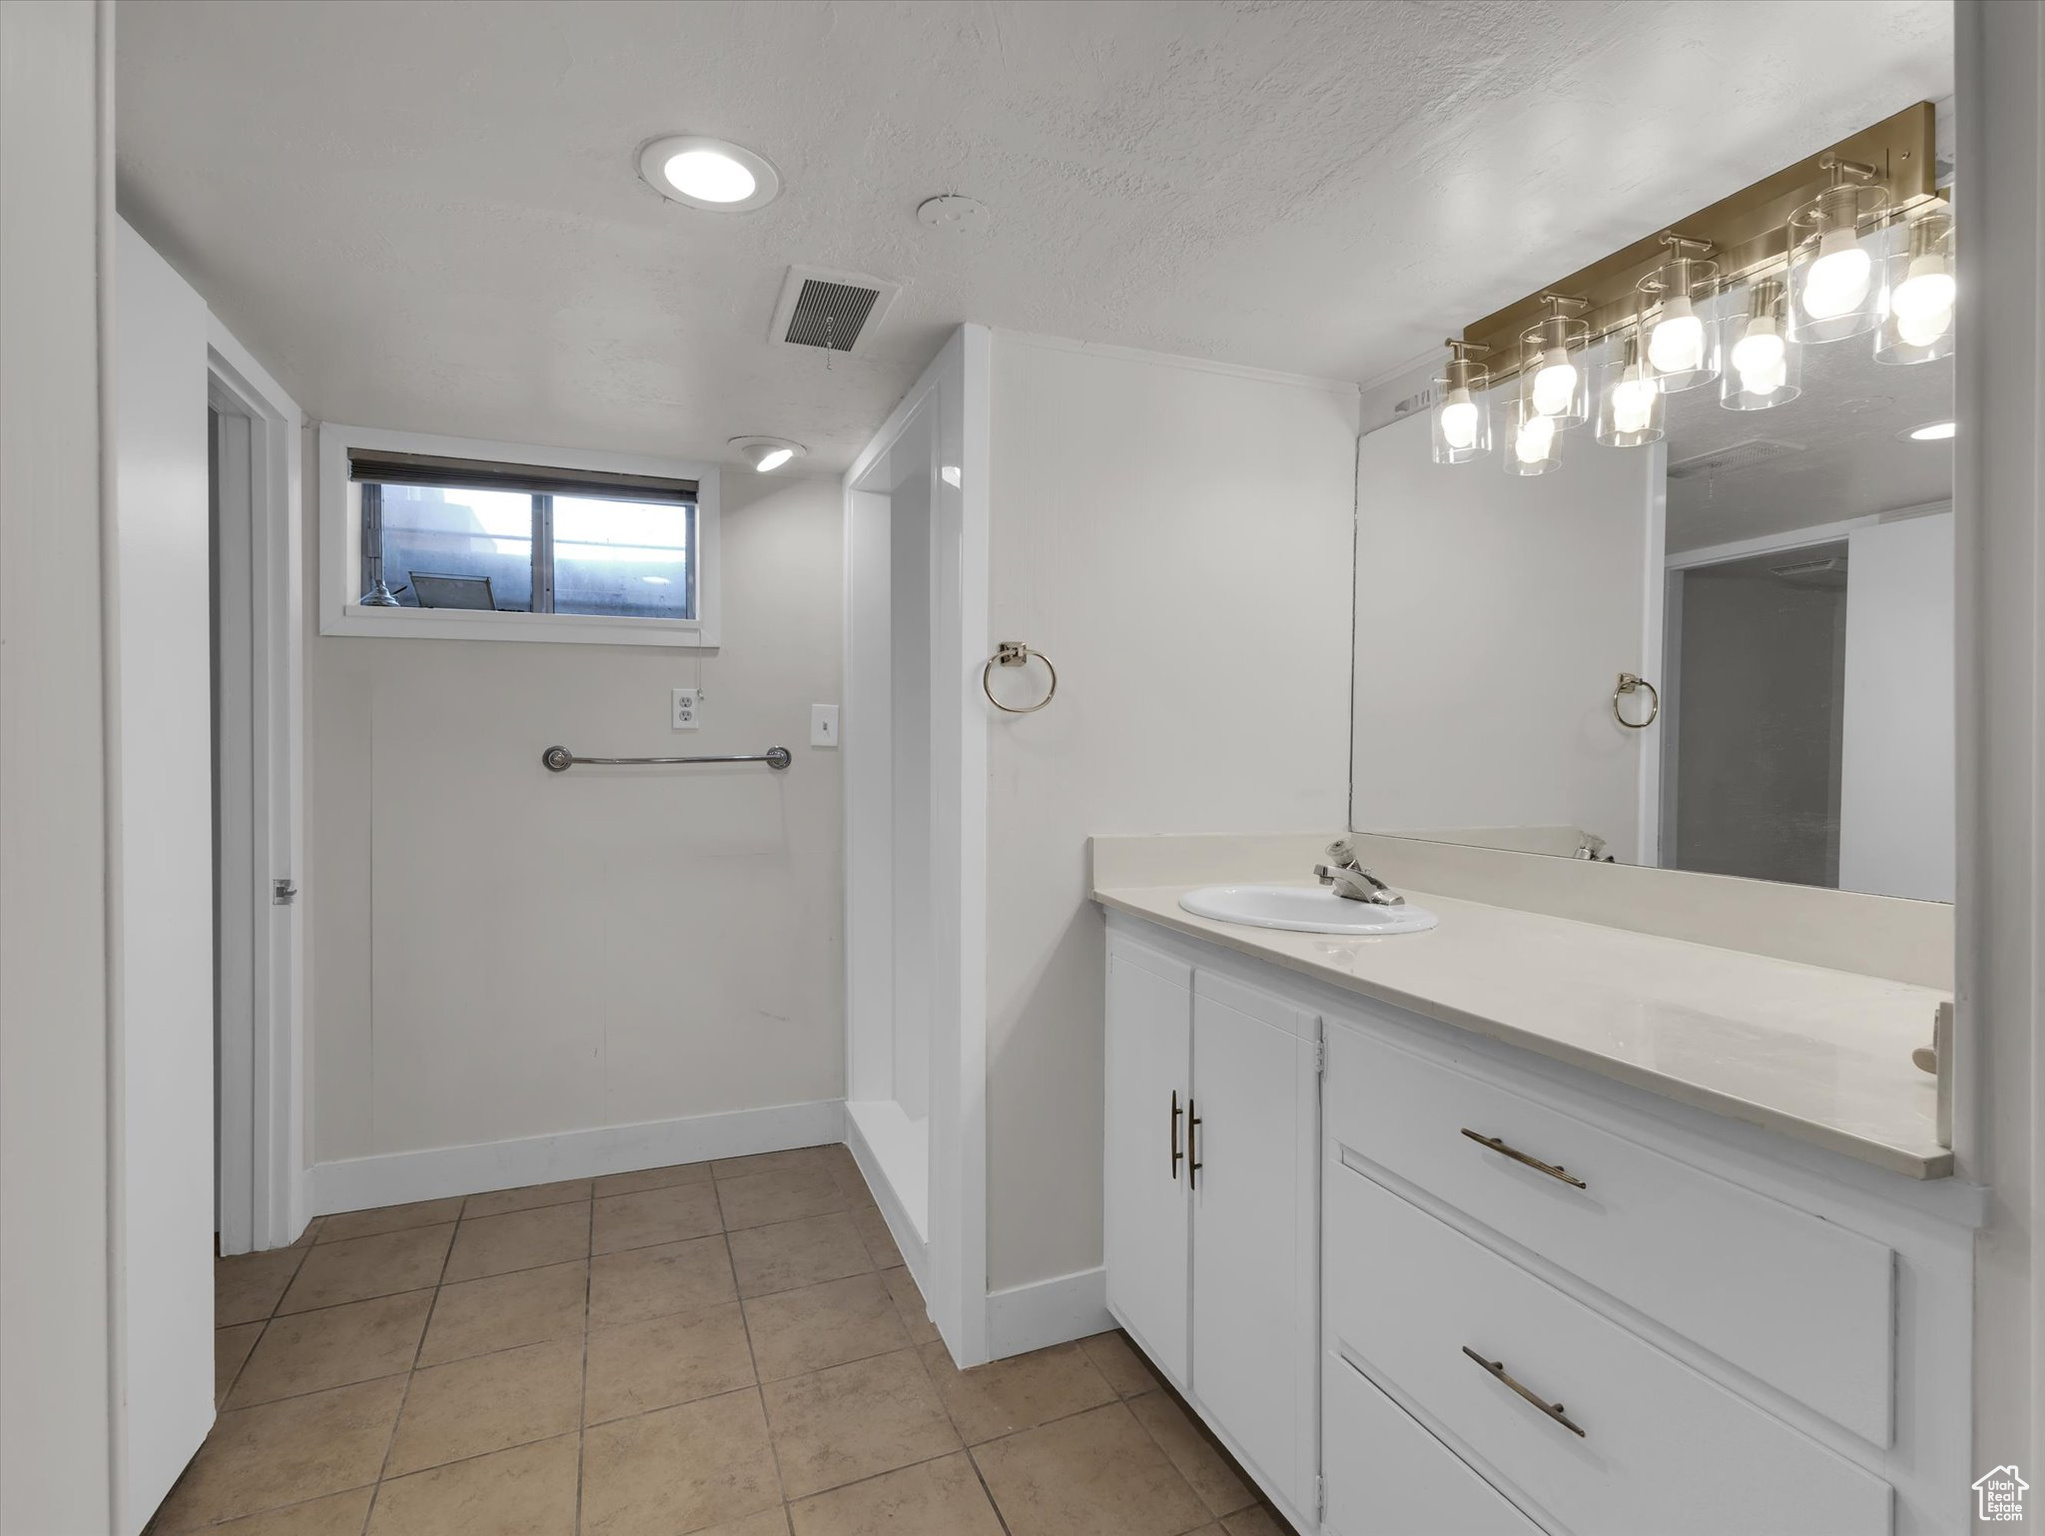 Bathroom featuring tile floors, a textured ceiling, and vanity